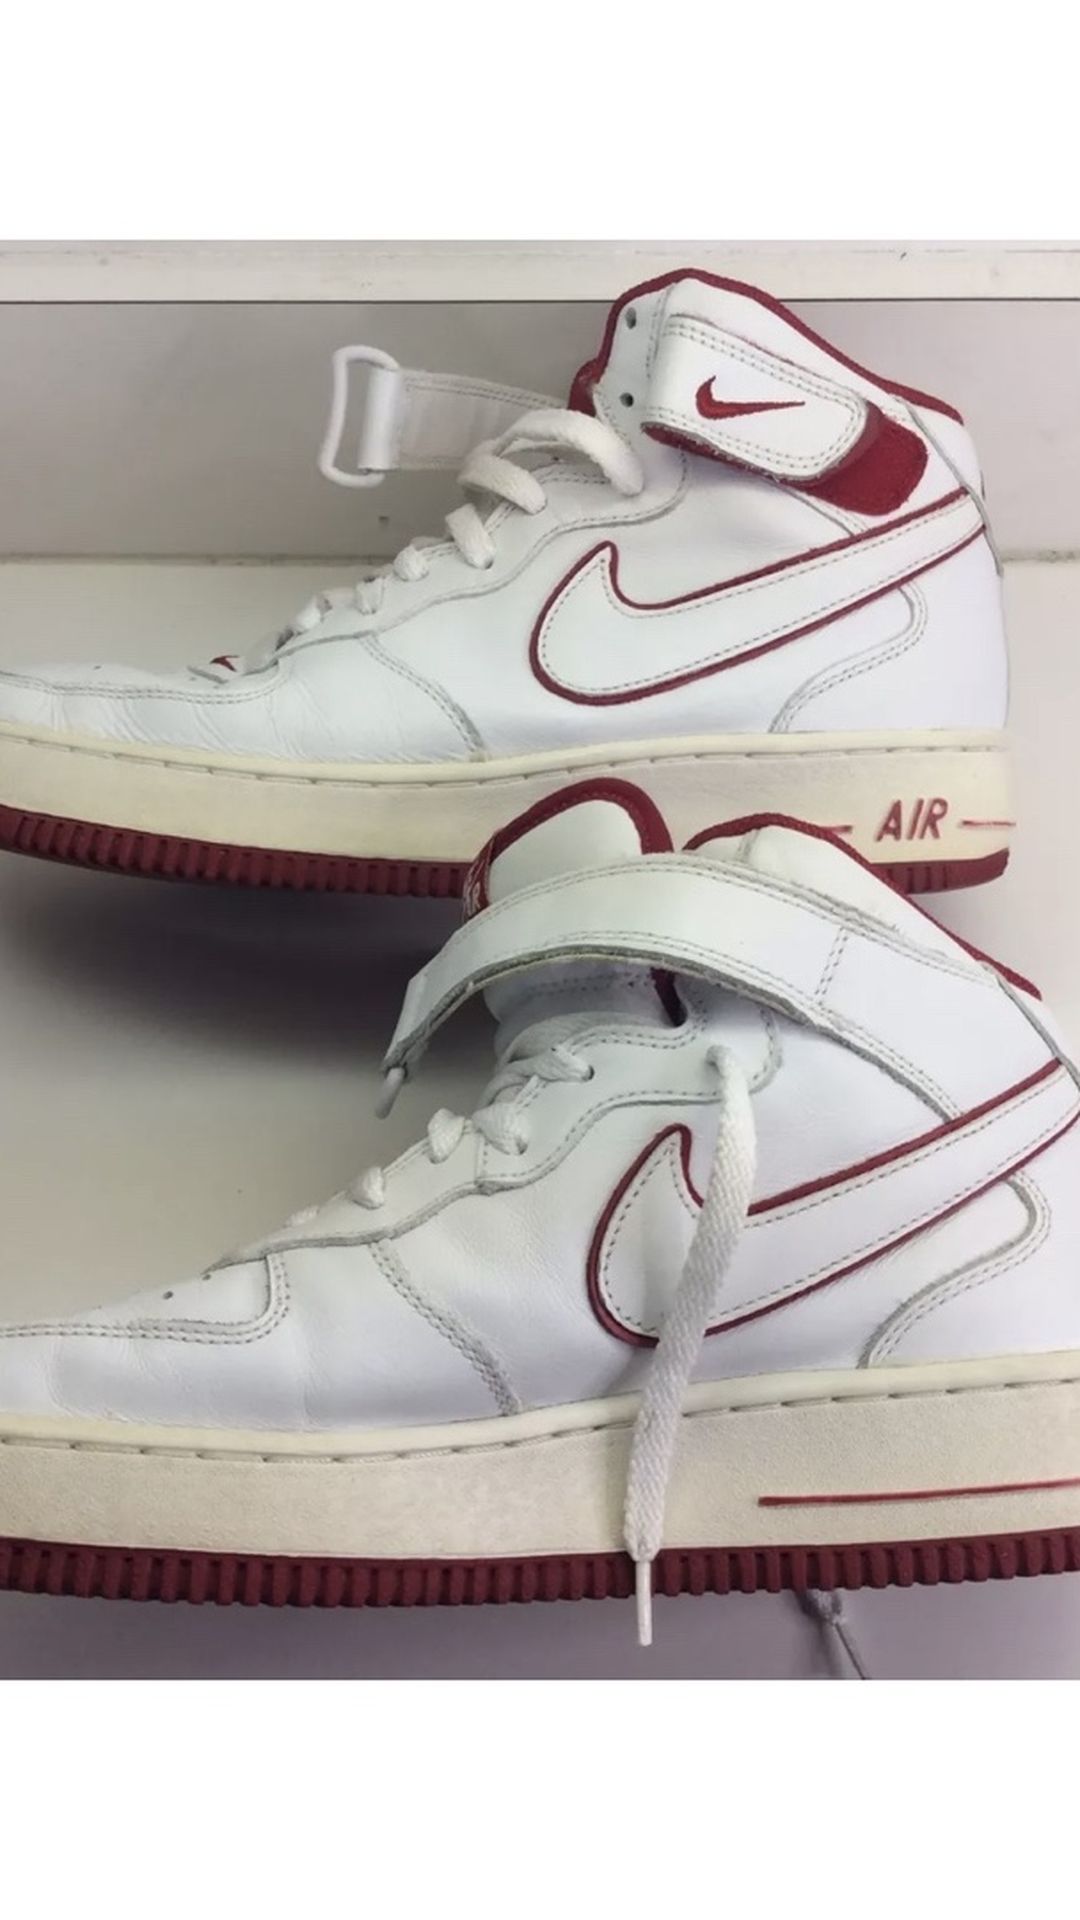 Vintage Nike Air Force 1 Mid Height White Red 2002 Basketball Sneakers SZ 10 VGC Air Force One